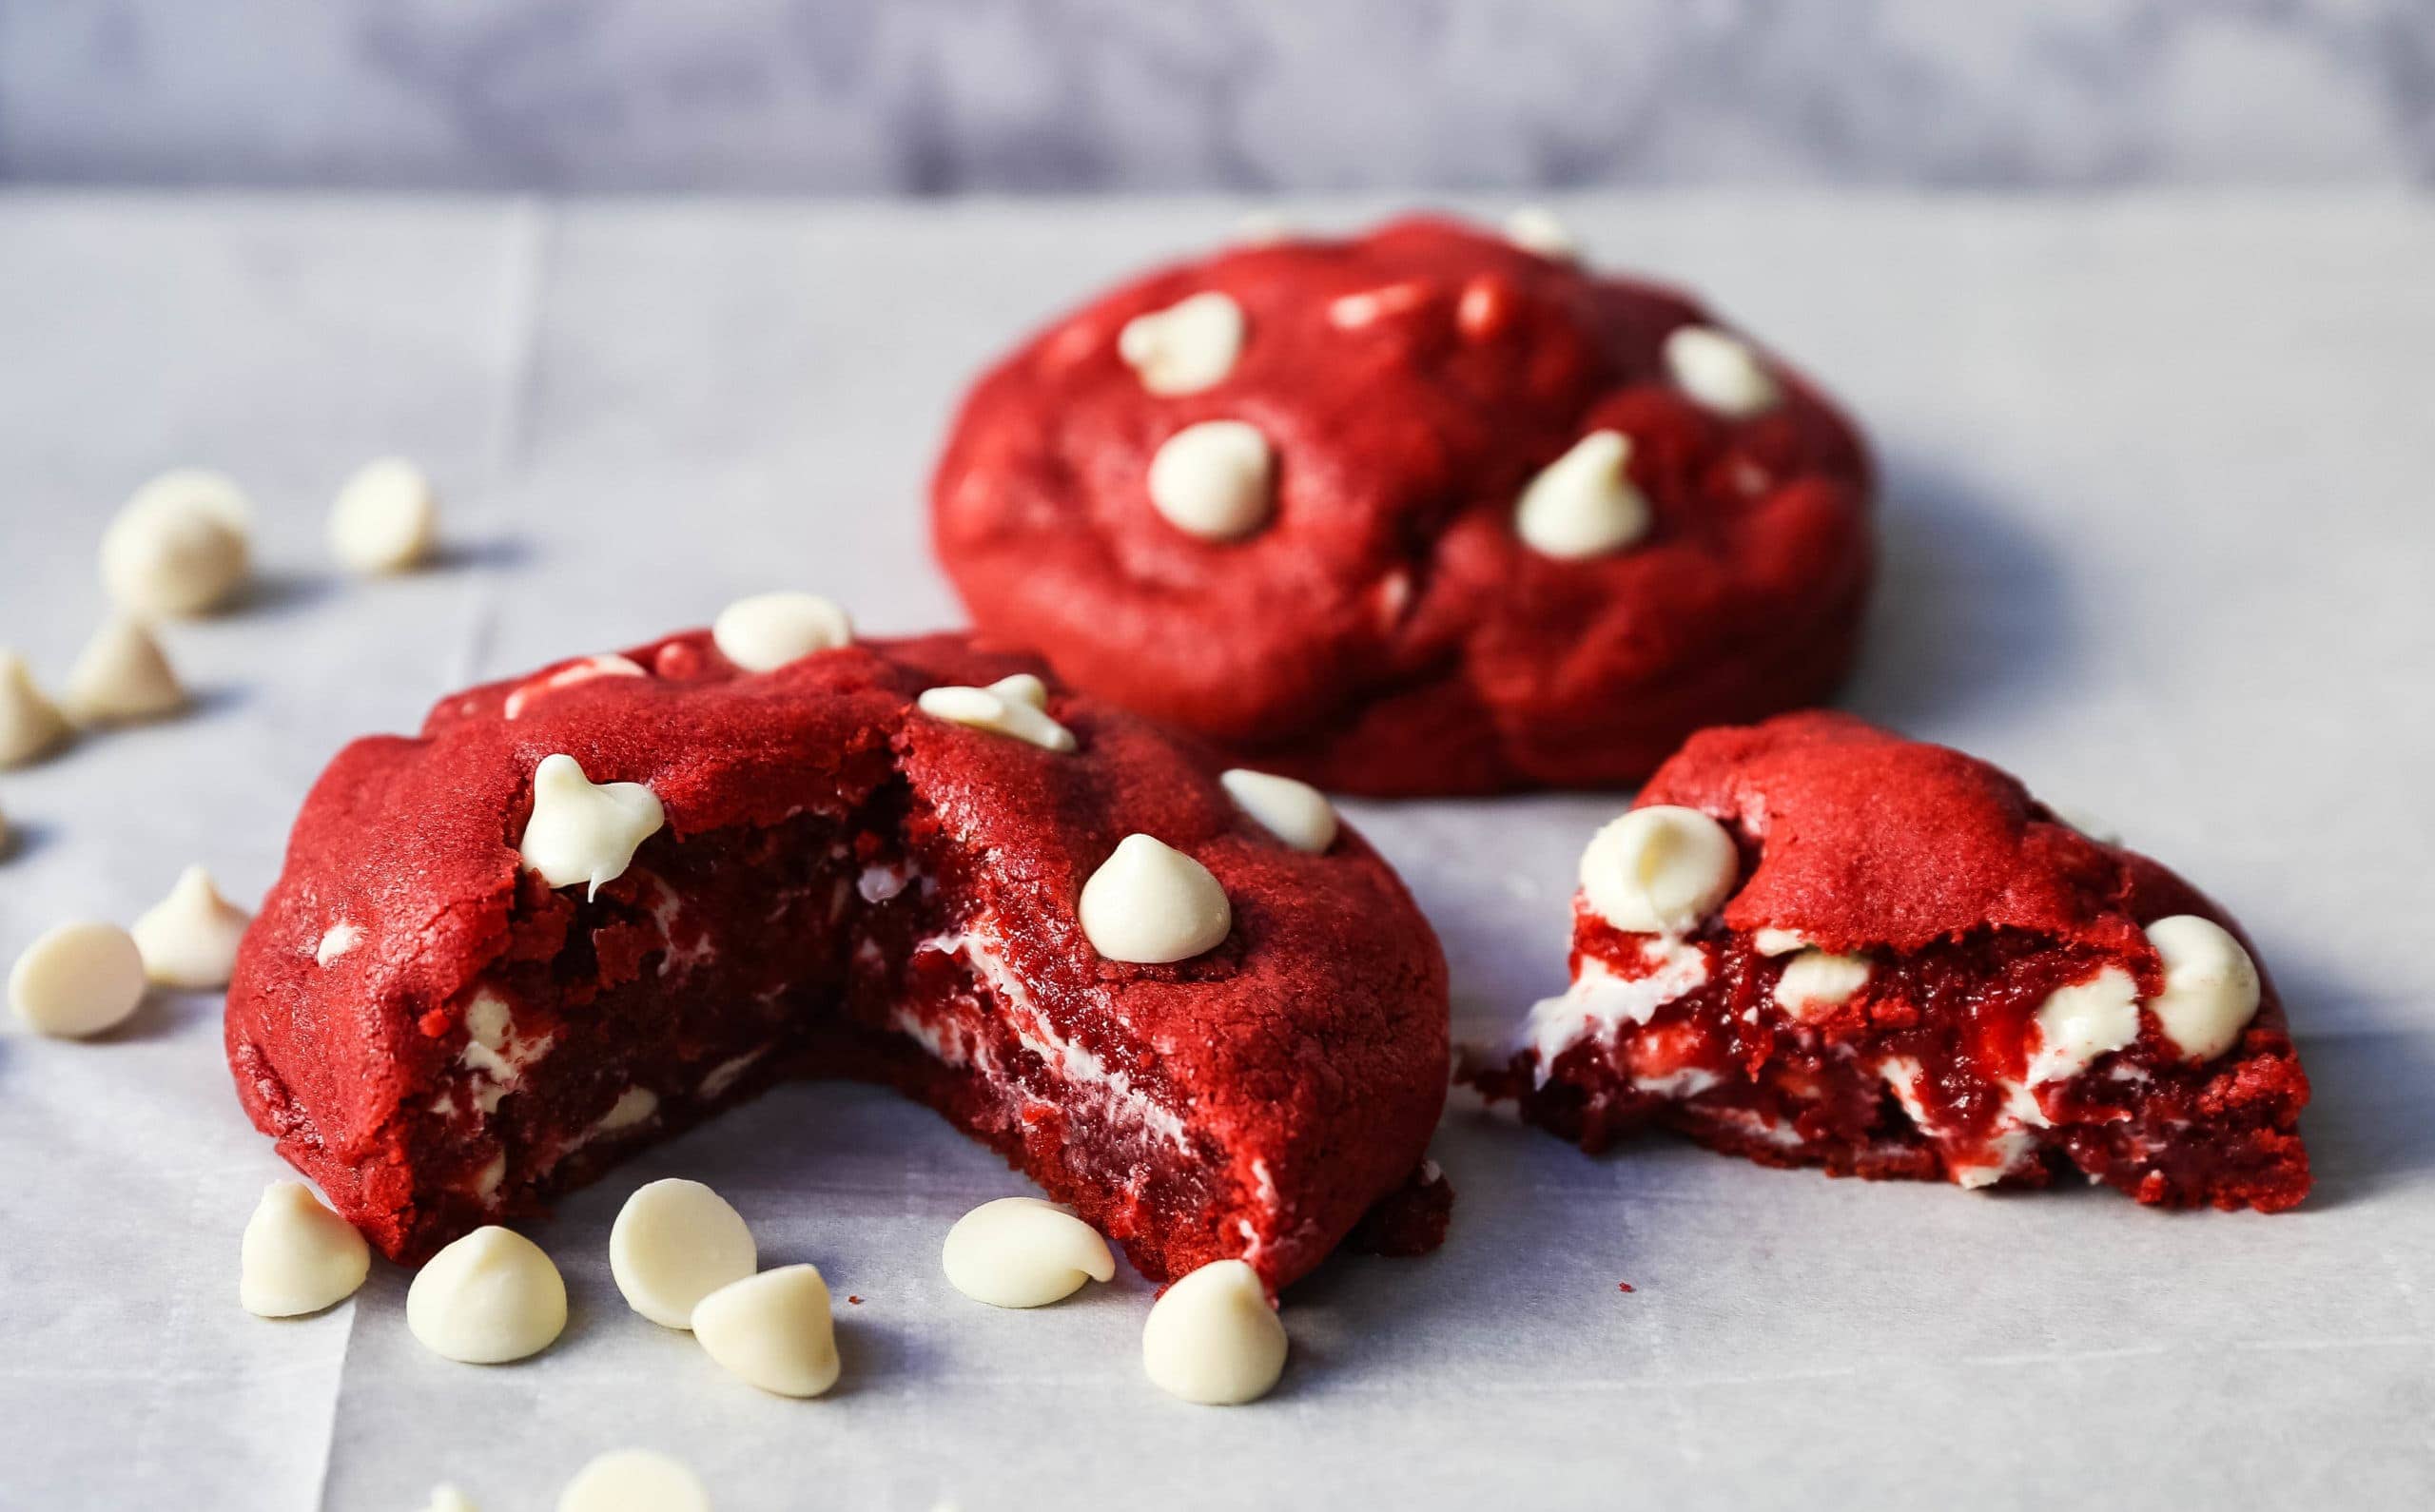 Red Velvet Cookies. Soft chewy famous Red Velvet Cookies with sweet white chocolate chips. www.modernhoney.com #redvelvet #redvelvetcookies #cookies #4thofJuly